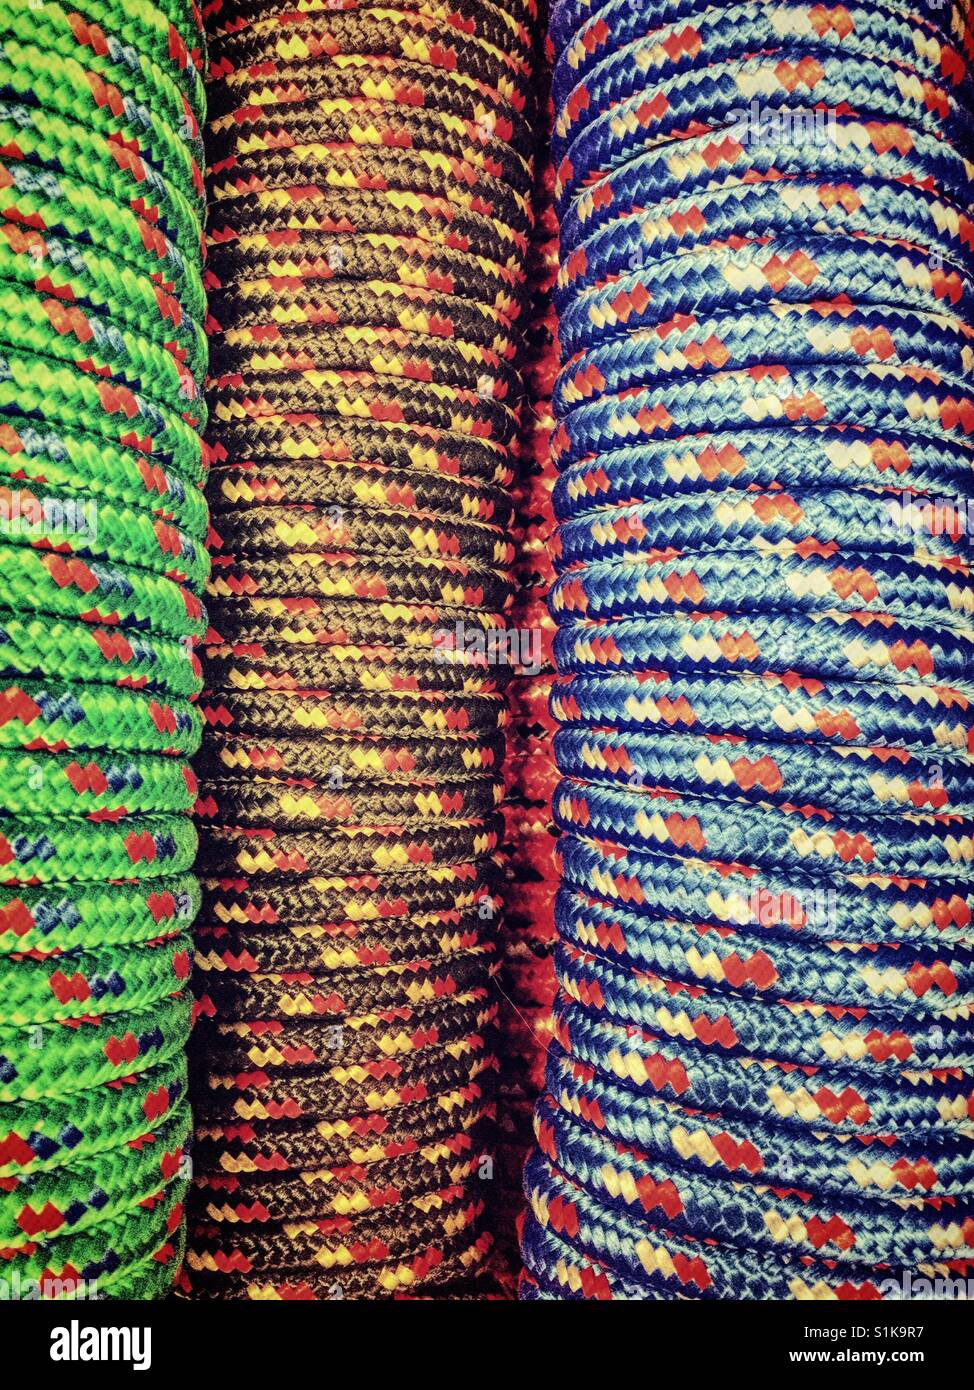 Coils of colorful rope in display at Home Depot, USA Stock Photo